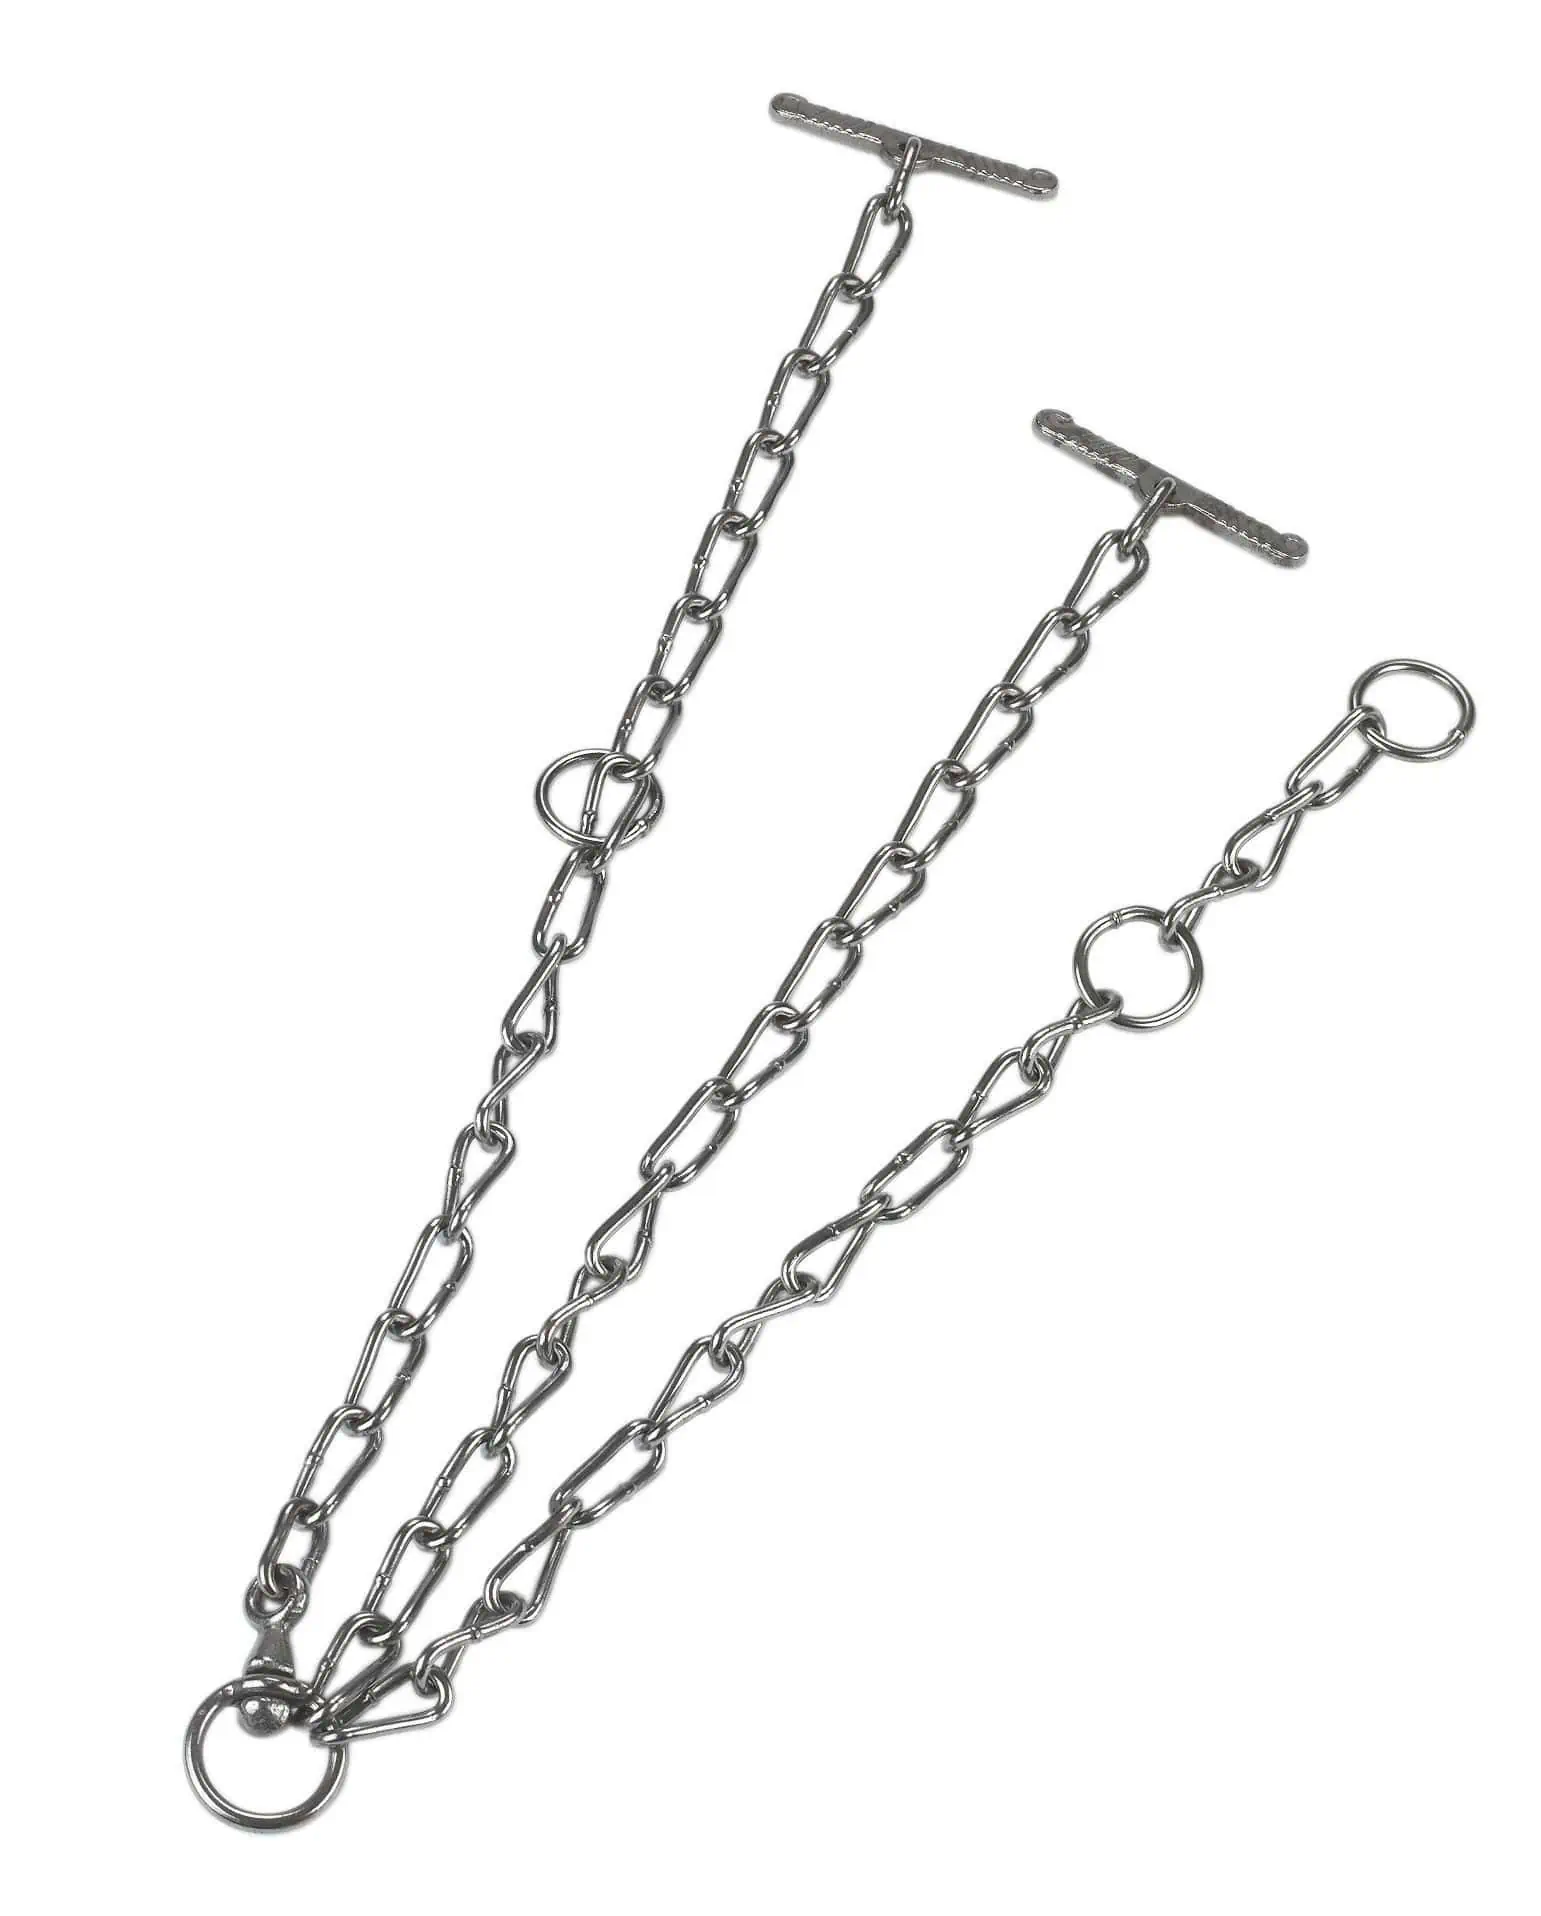 Cow chain single lengthened galvanized